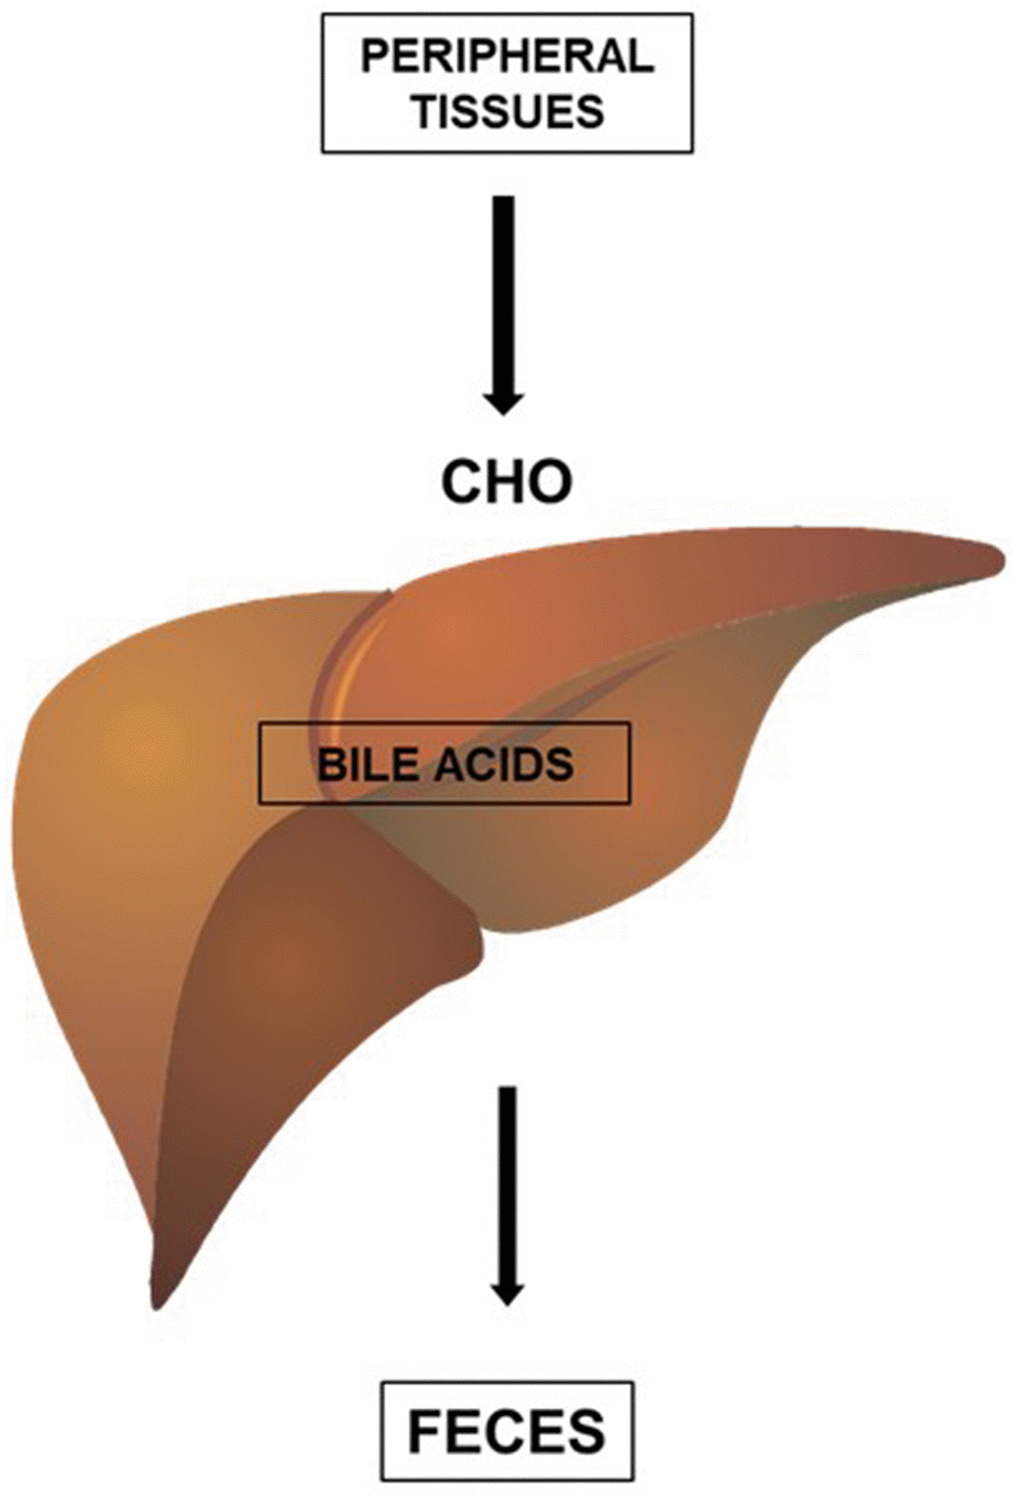 HDL promotes the reverse transport of cholesterol (CHO), a process by which cholesterol (CHO) is removed from peripheral tissues and delivered to the liver for elimination in the feces. The excretion of cholesterol by the liver, in the form of bile acids, is an important form of elimination of cholesterol from the body.